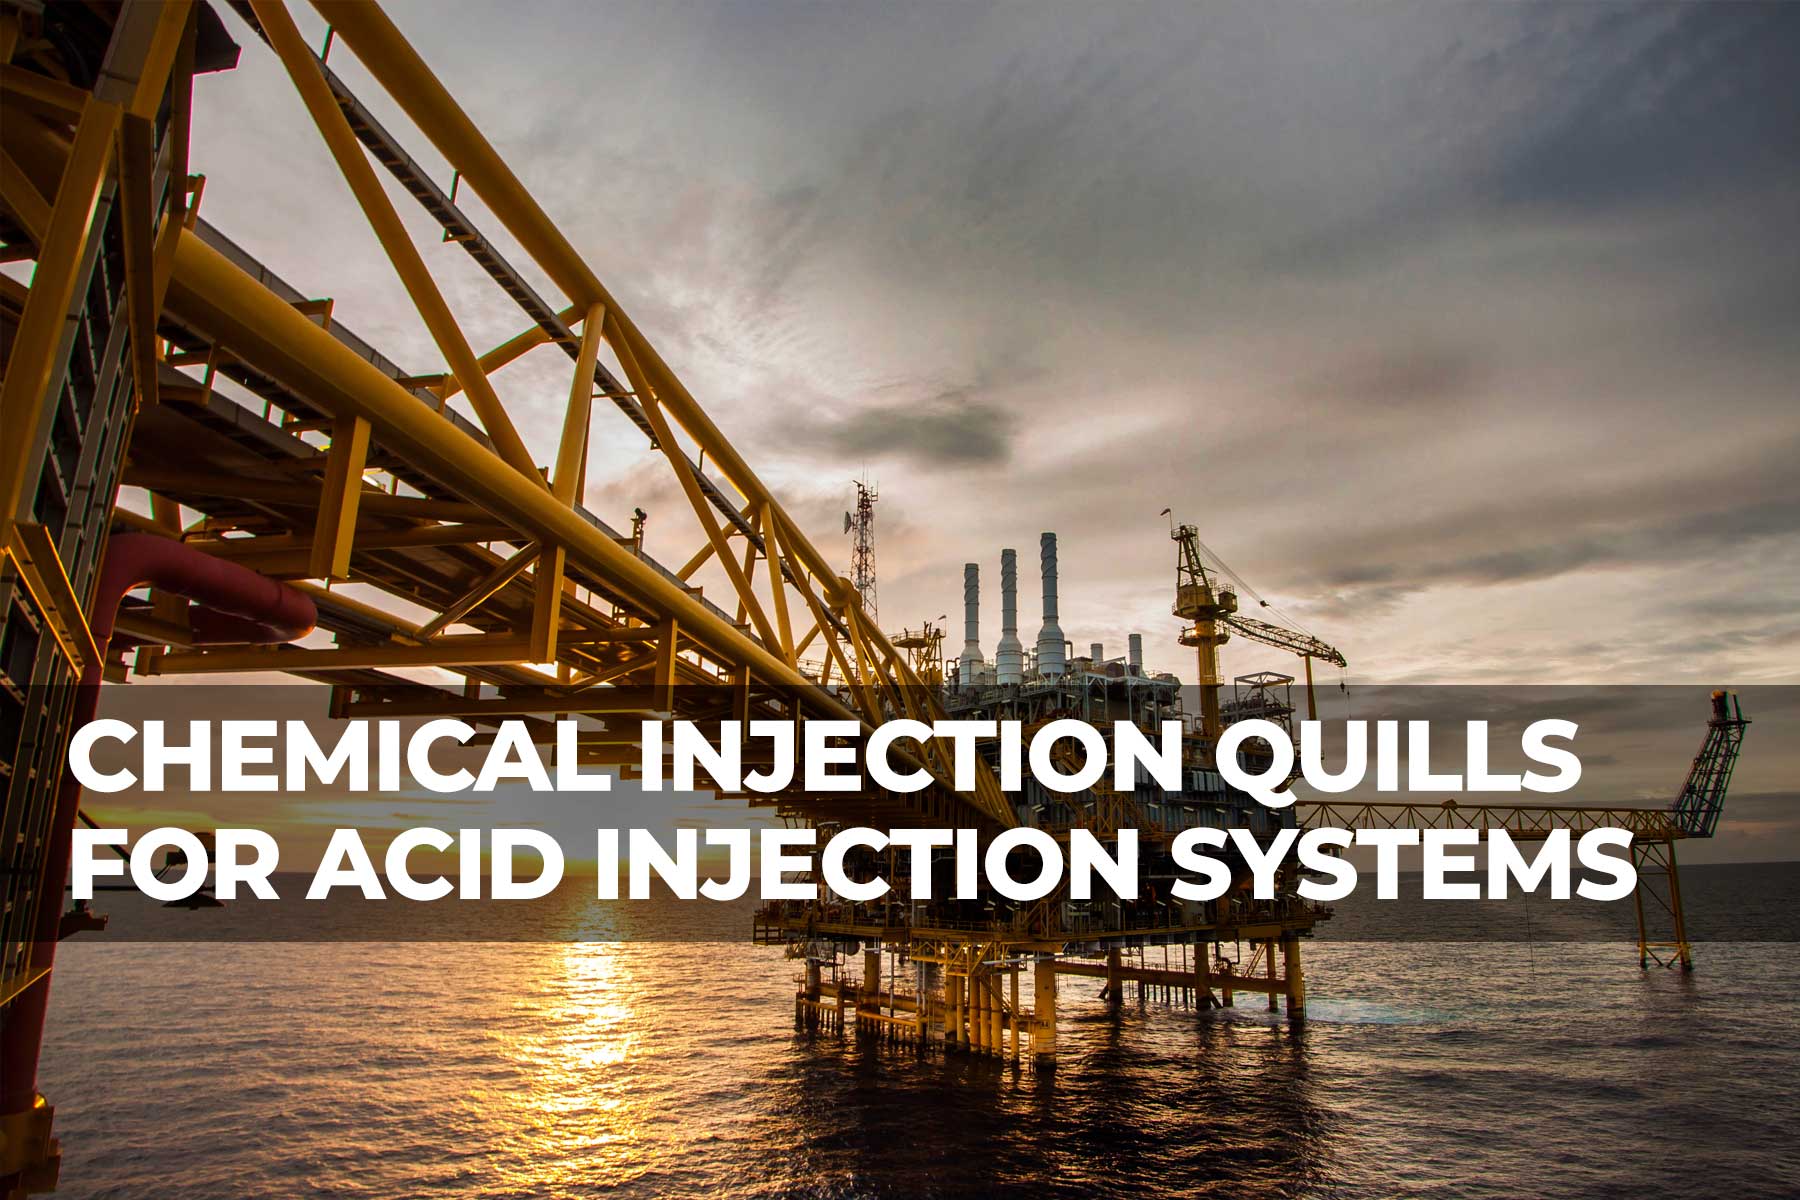 Chemical injection quills for use in acid injection systems